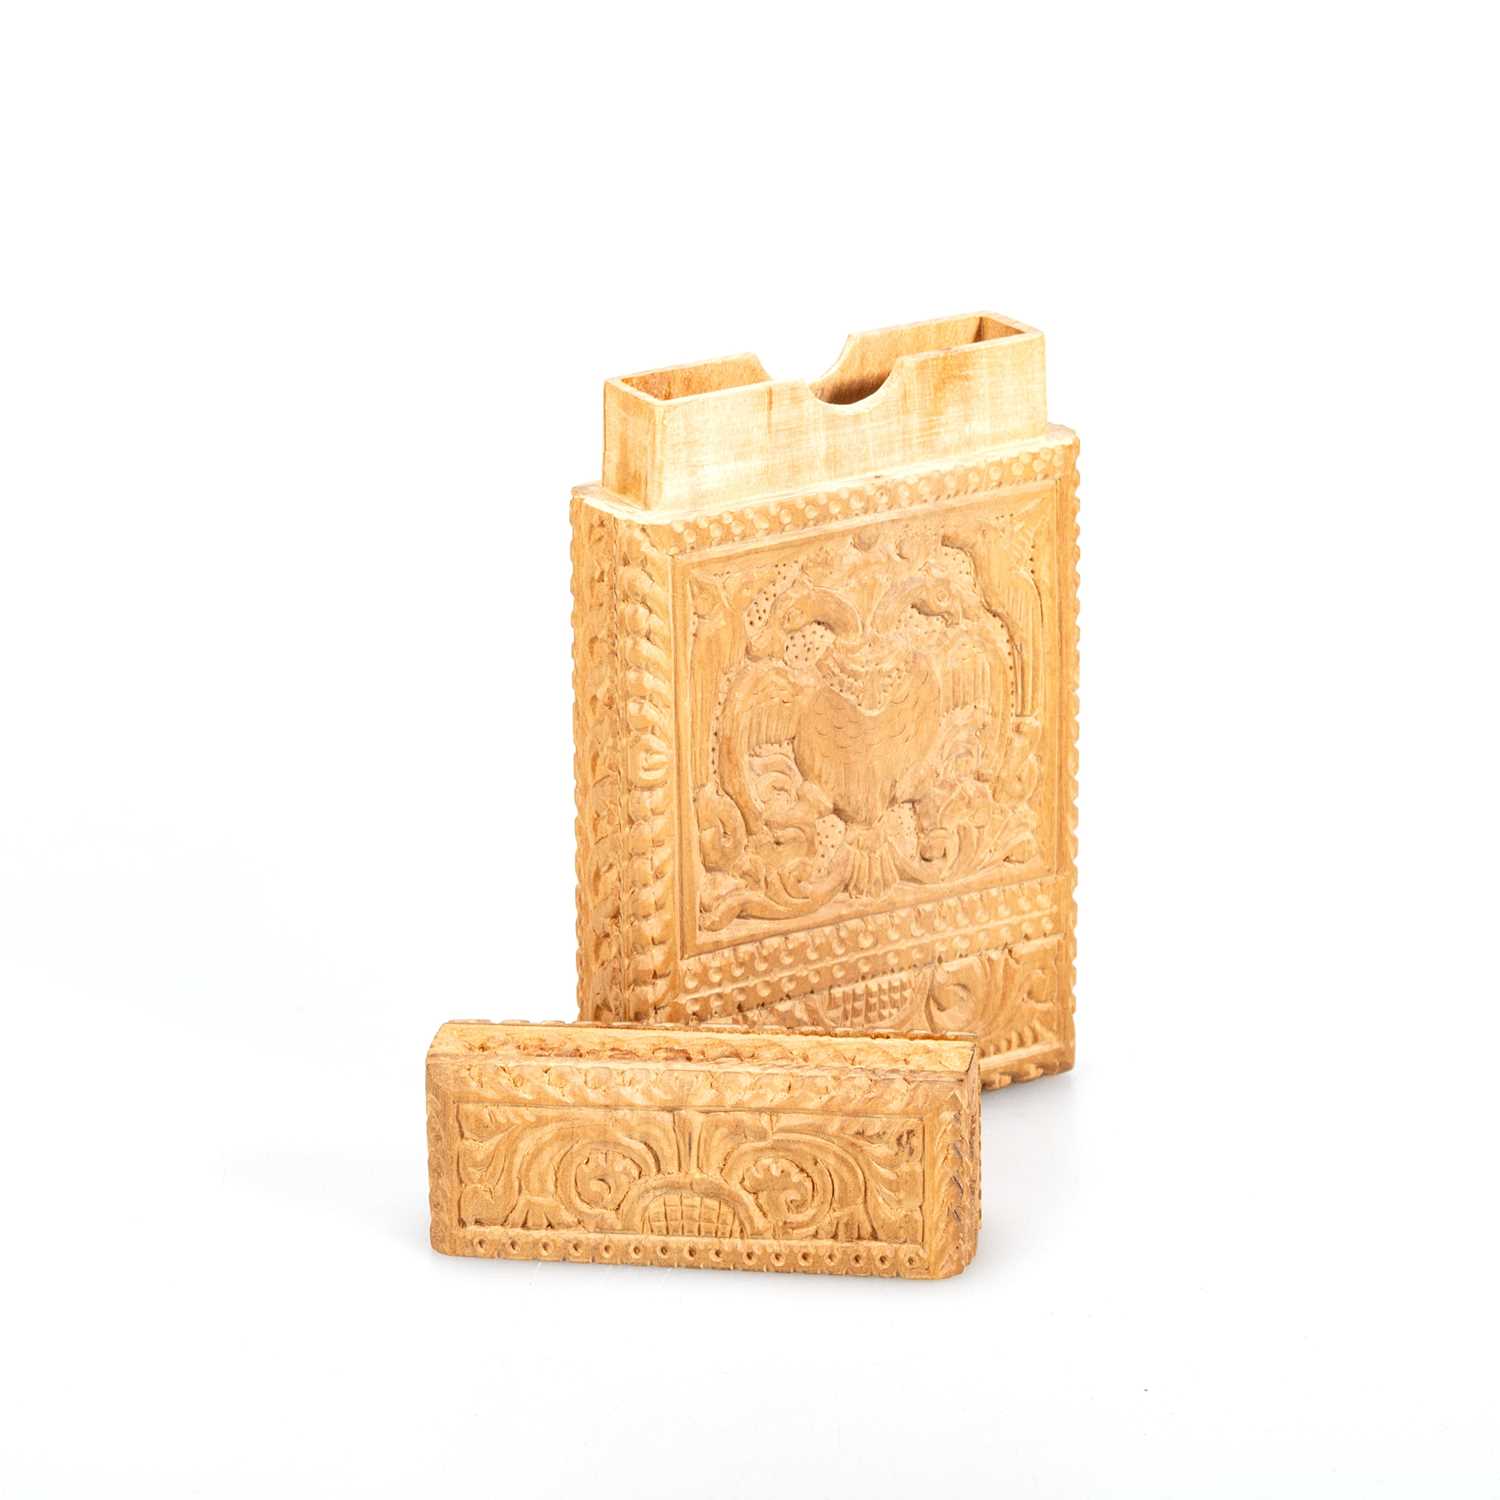 A SOUTH-WEST INDIAN SANDALWOOD CARD CASE, 19TH CENTURY - Image 2 of 2